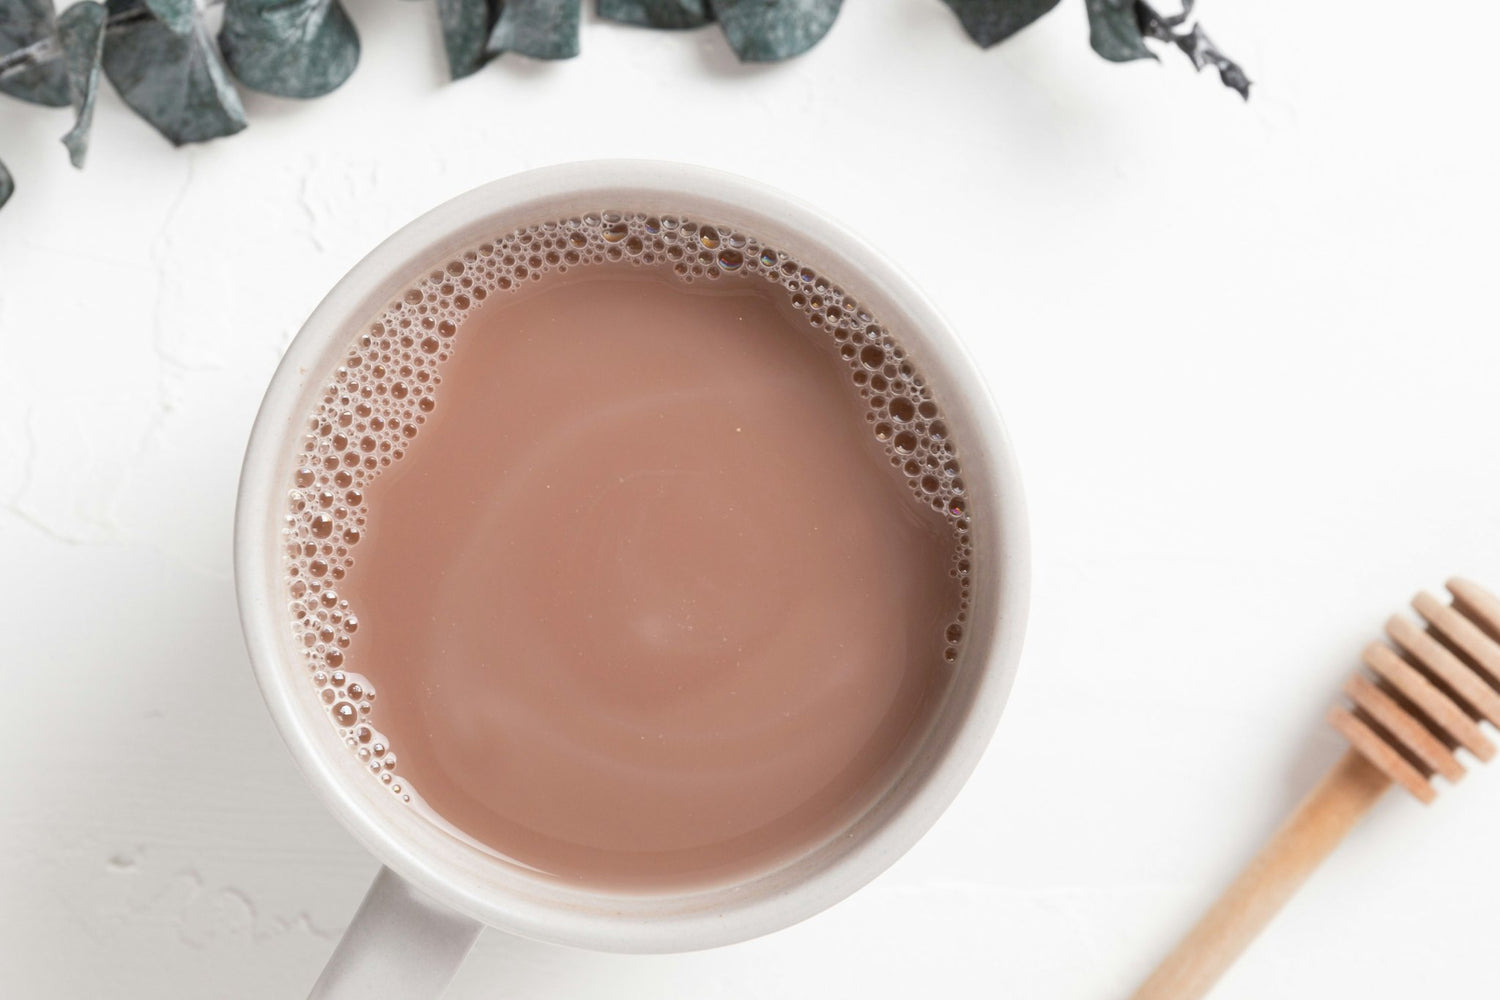 Spring Into Action: The Best Teas, Foods, and Natural Products To Boost Your Energy This April - Loose Leaf Tea Market